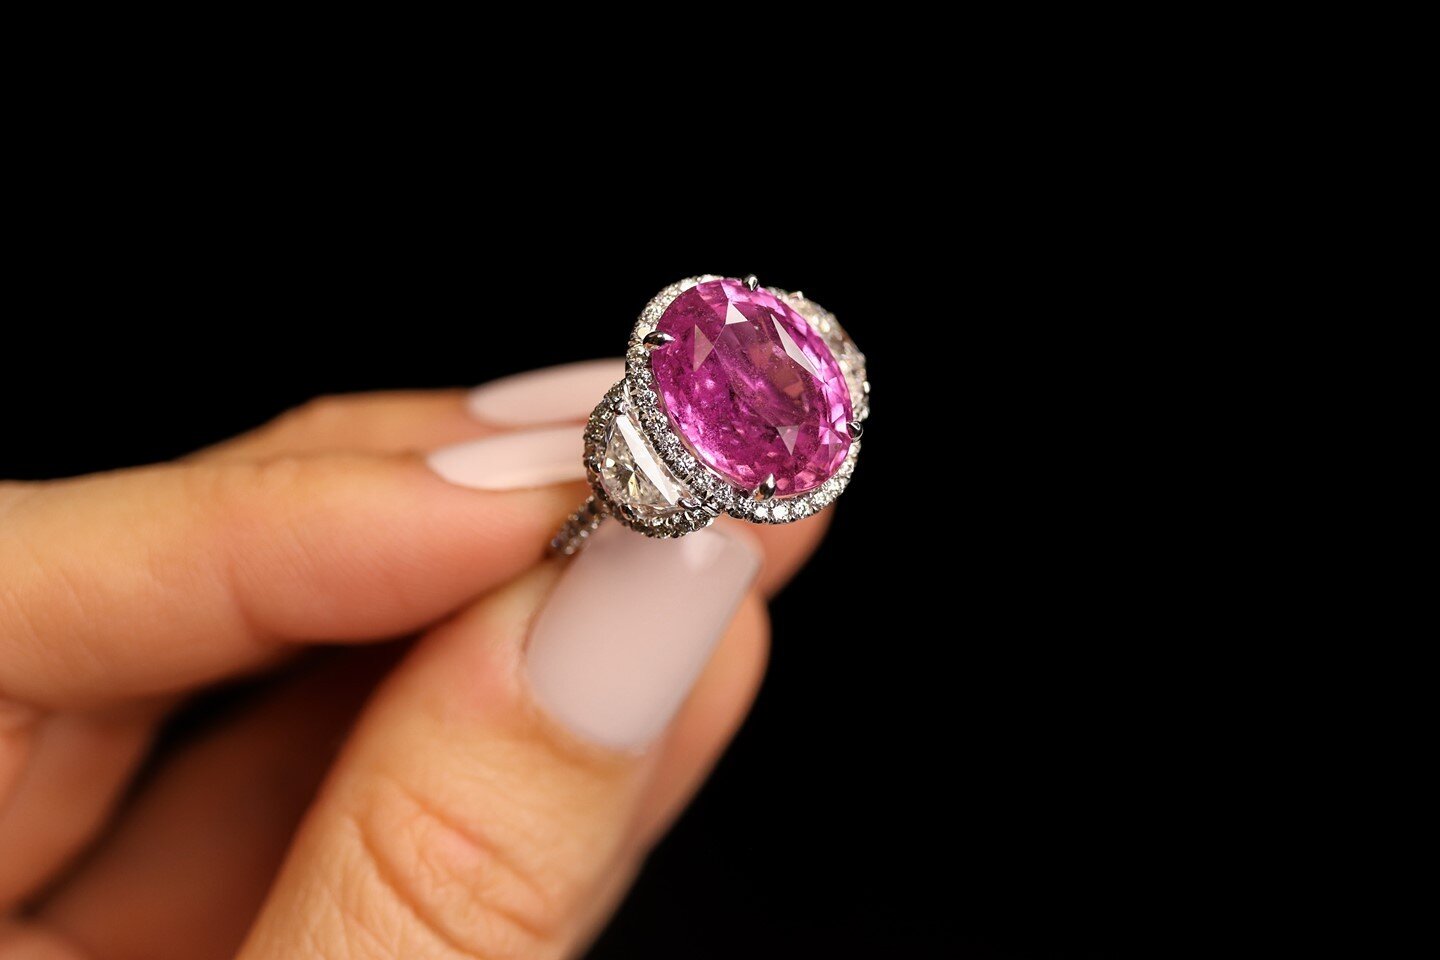 We LOVE #Sapphires ! They come in so many colors, they are fun and you can match them up with so many looks! This one is a 10.01ct, Pink Sapphire and diamond ring. What a perfect gift for the summer!

#raimanrocks  #lifecelebrations #diamonds #pinkdi